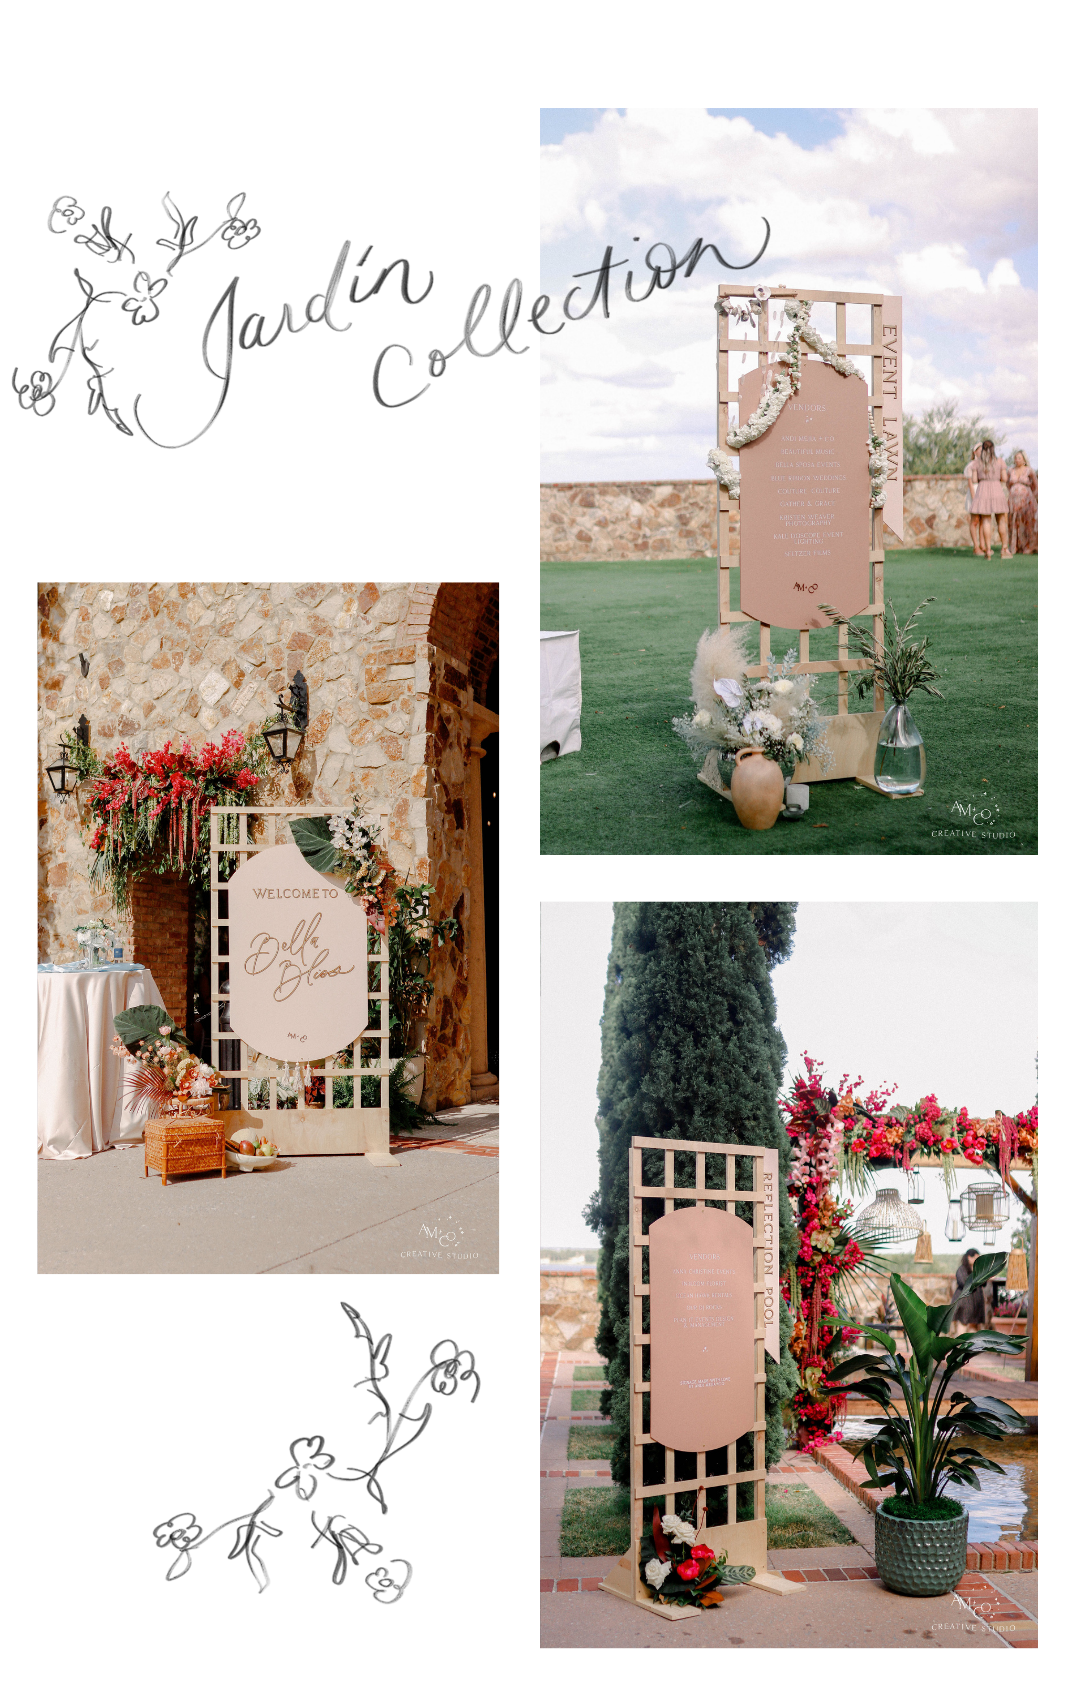 Wedding signage - the Jardin Collection - for rent